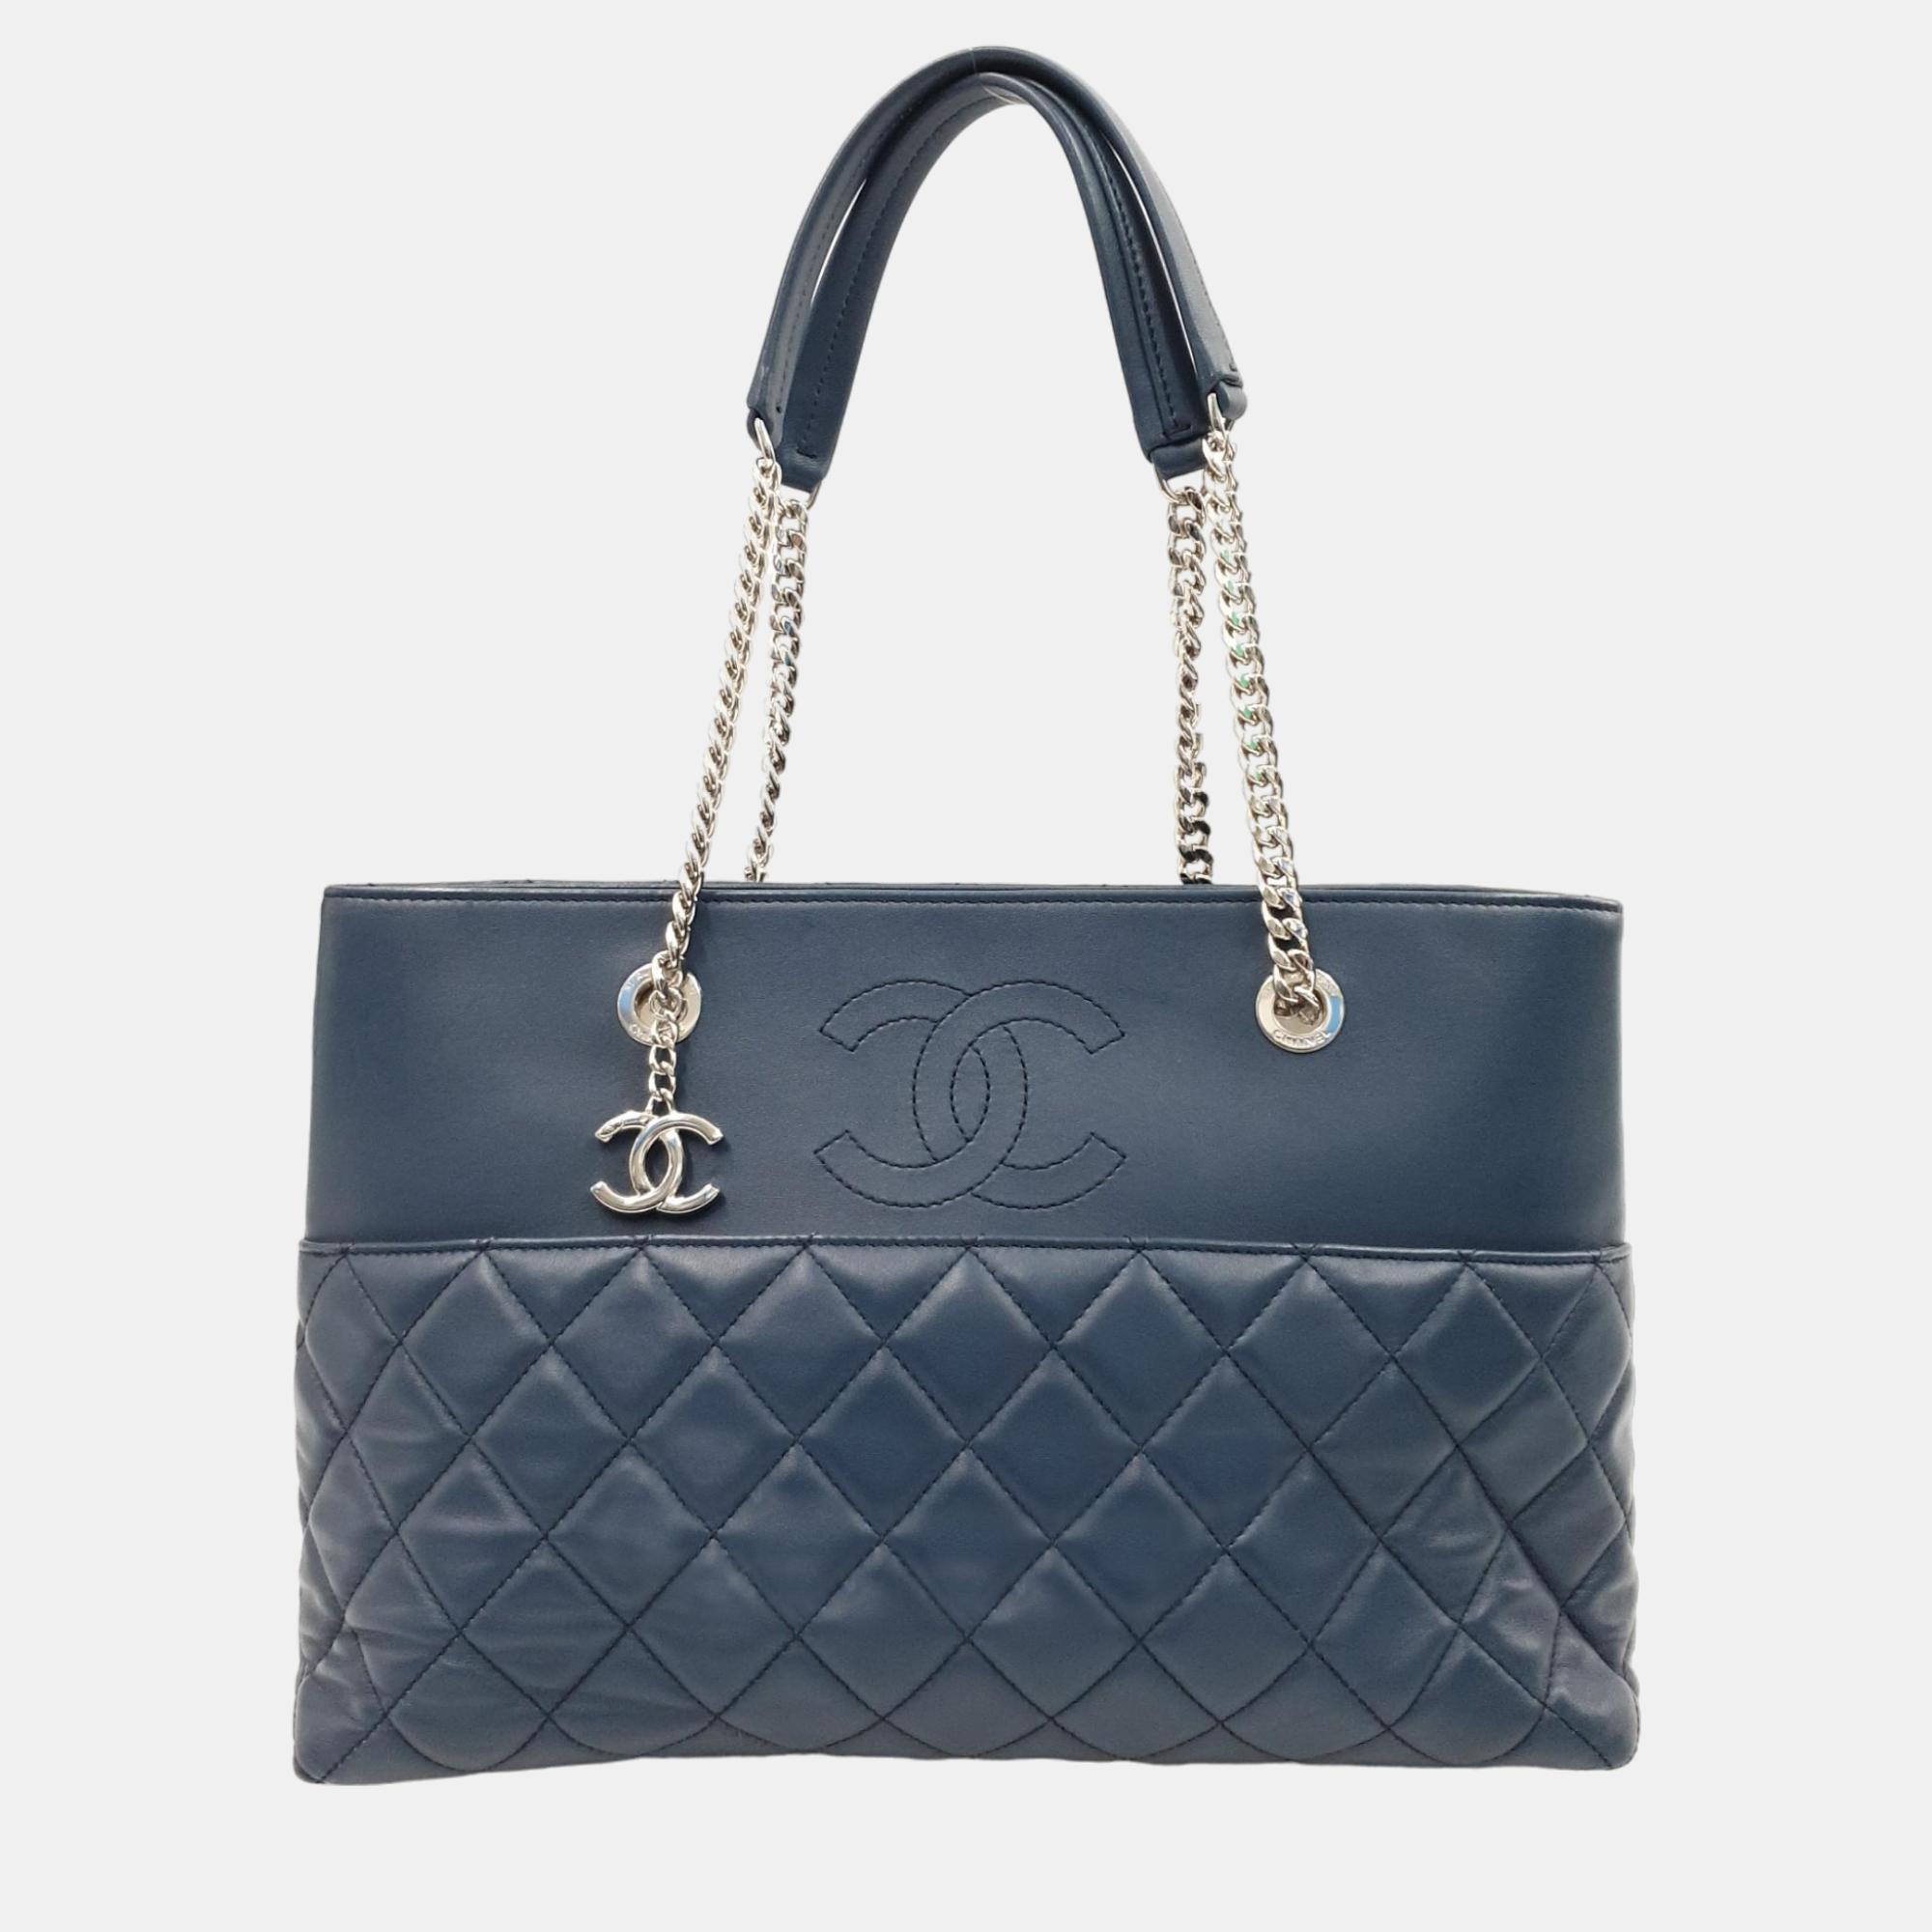 Chanel Blue Leather Urban Tote Bag